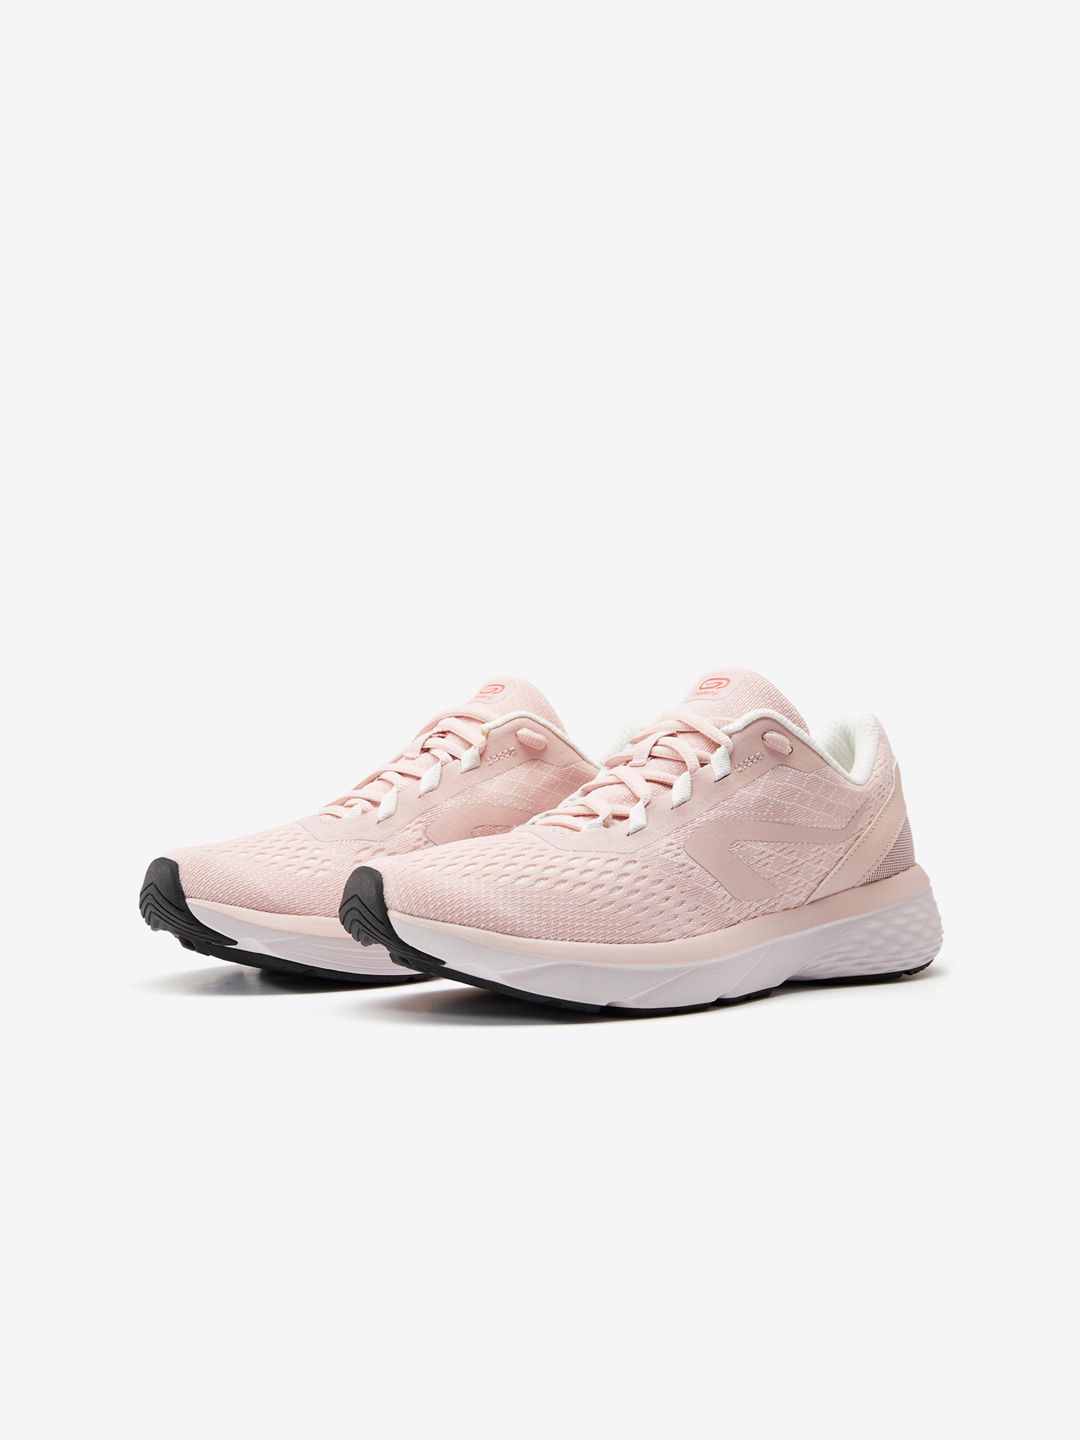 Kalenji By Decathlon Women Pink Synthetic Running Shoes Price in India,  Full Specifications & Offers